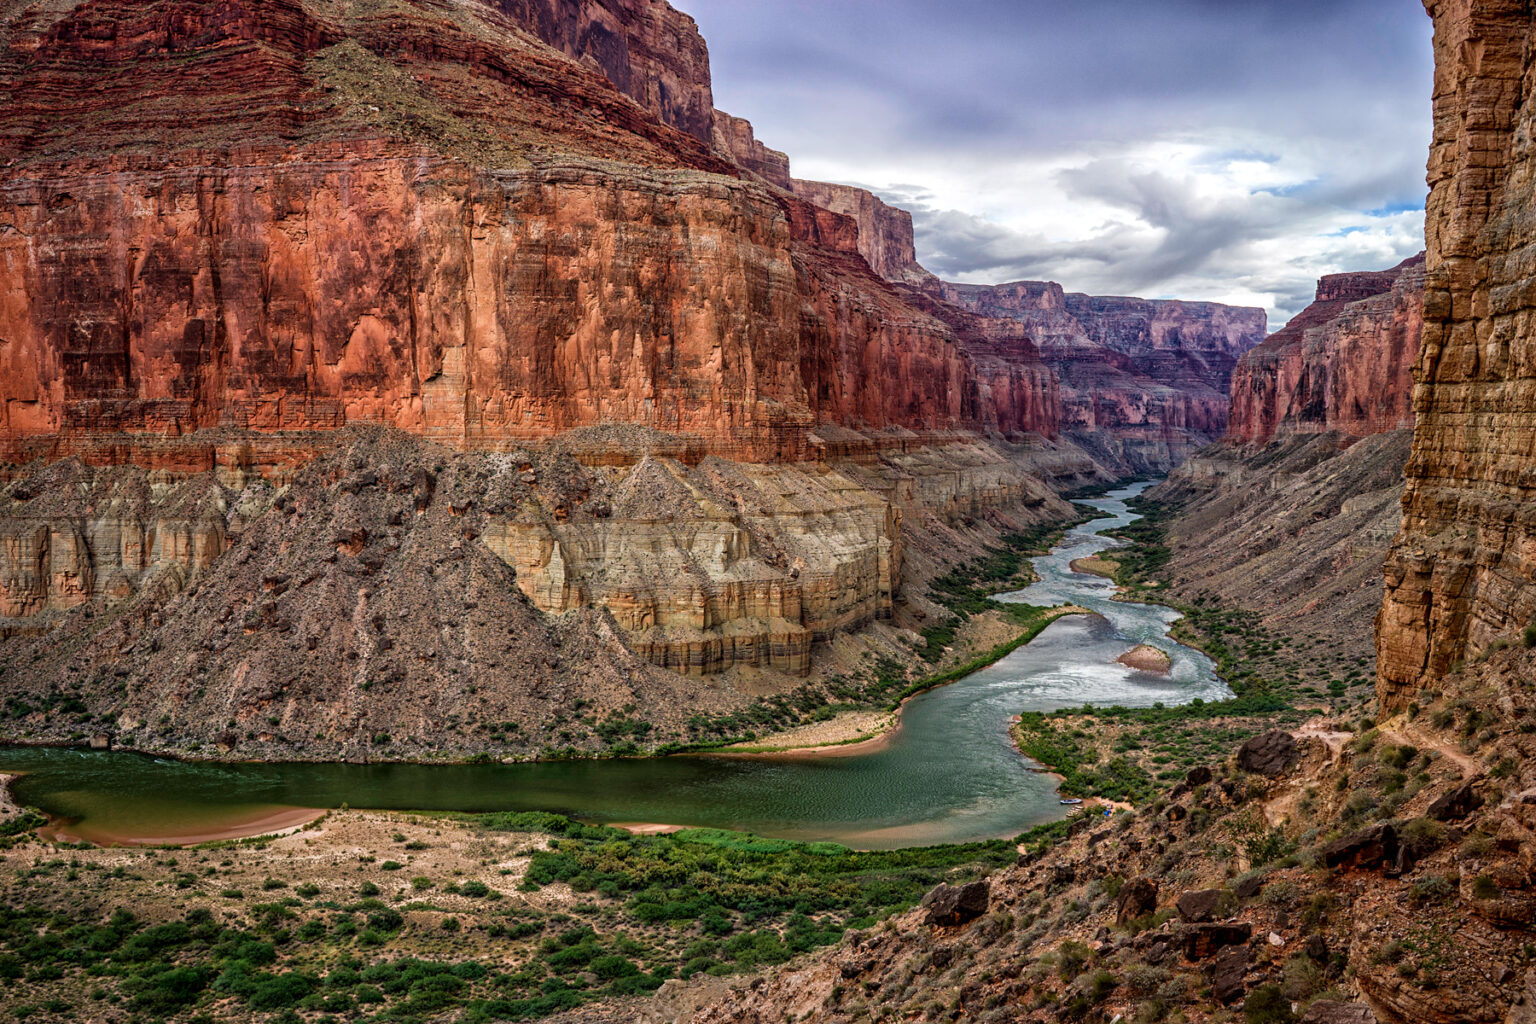 View downstream from Nankoweep in Grand Canyon National Park